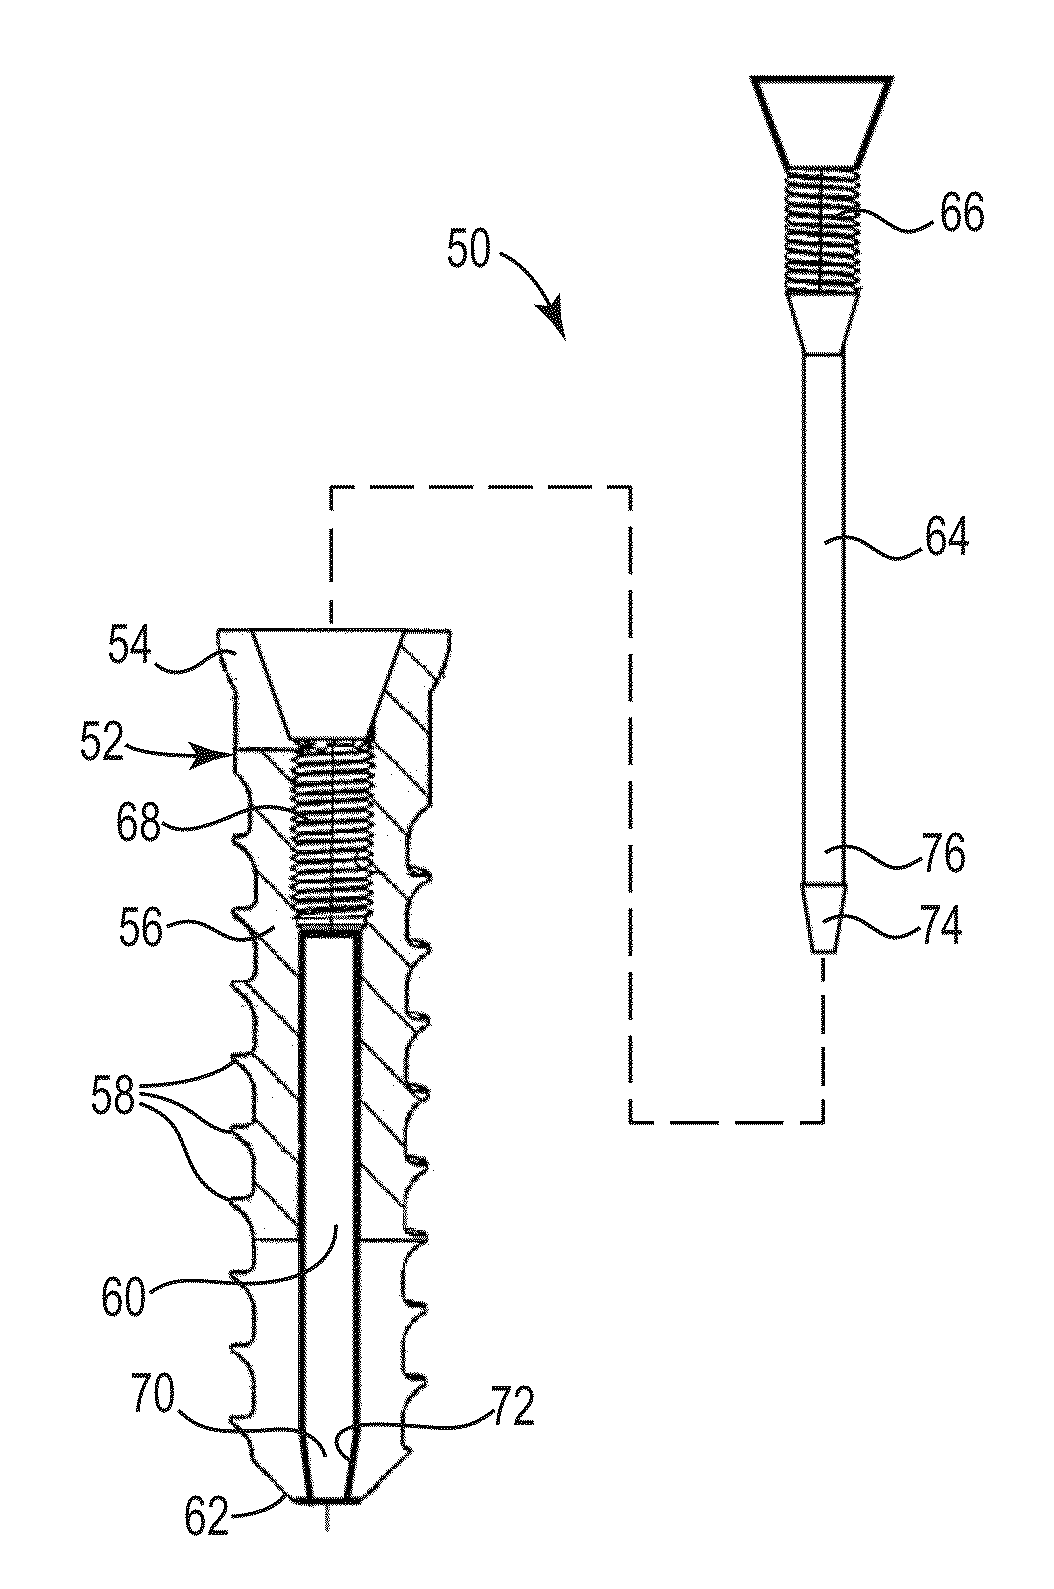 Fixation system for orthopedic devices